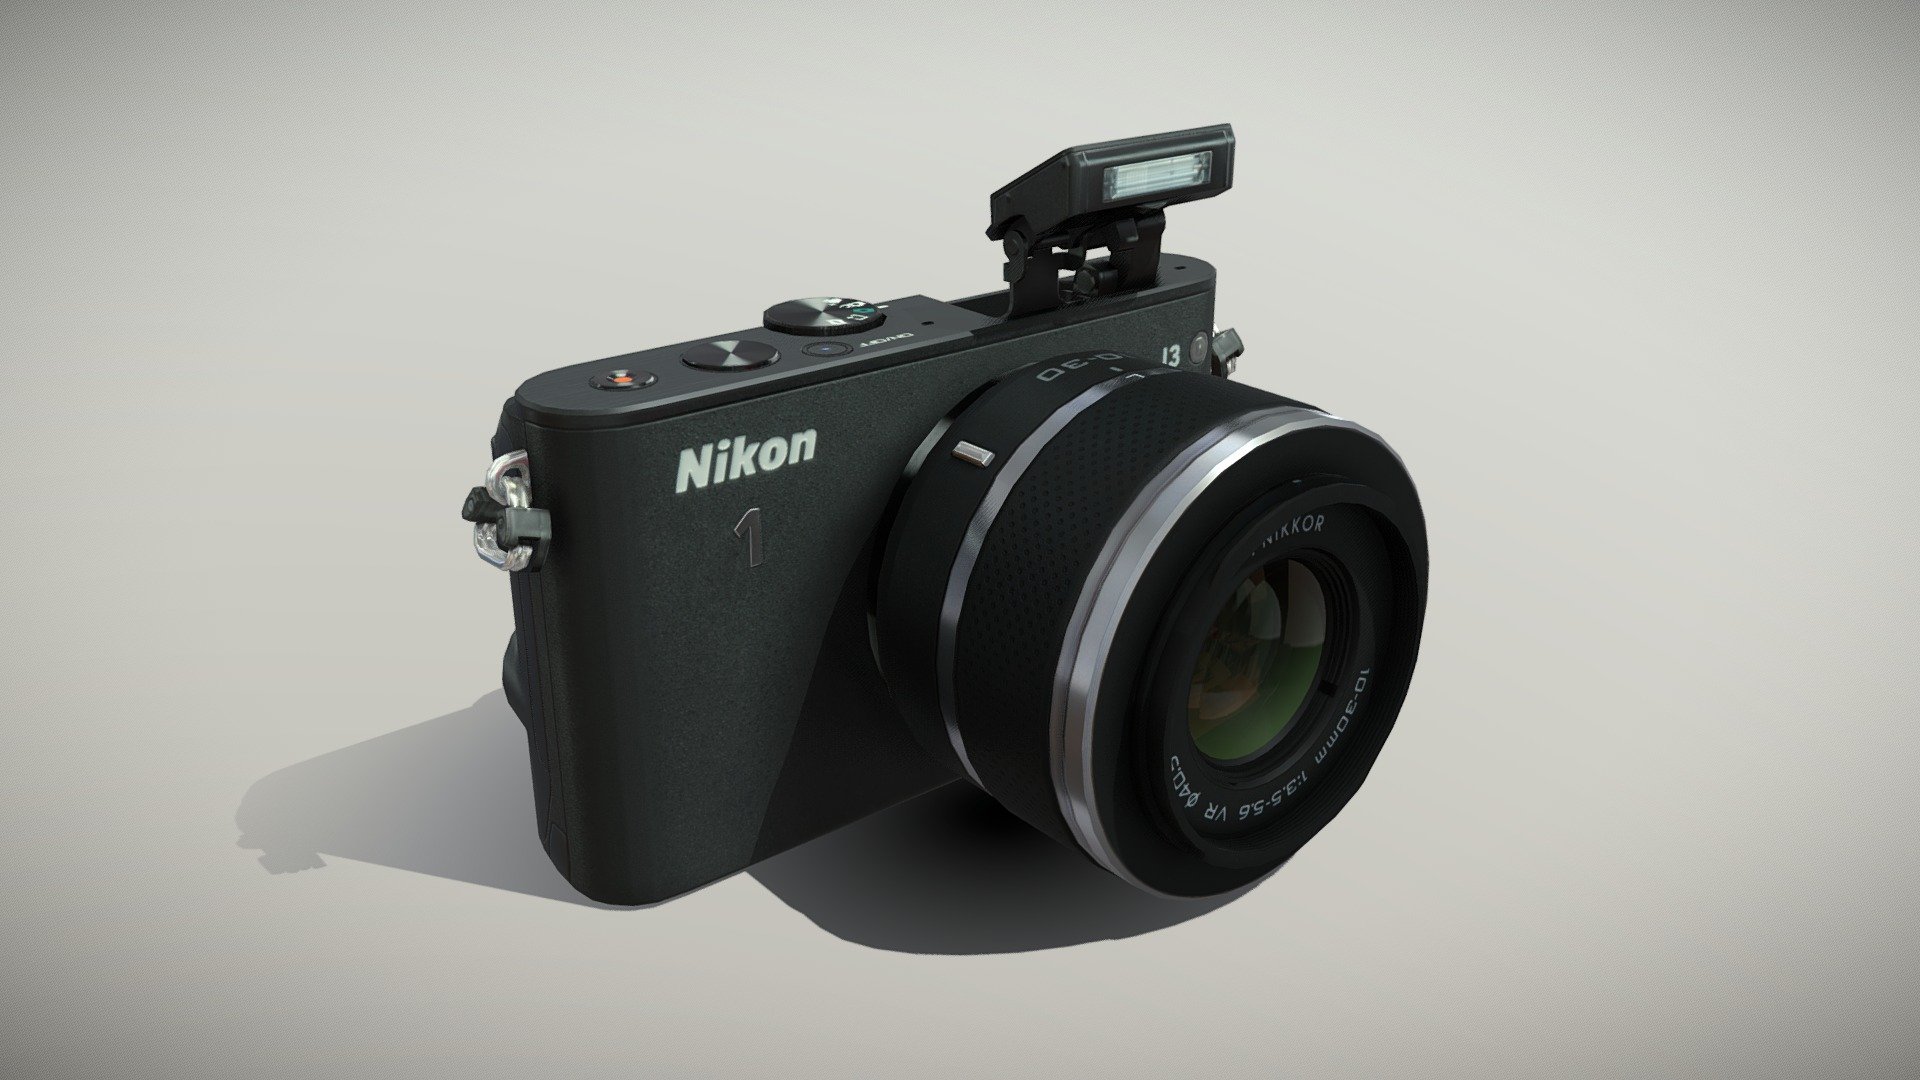 •   Let me present to you high-quality low-poly 3D model Nikon 1 J3 Kit 10-30mm Black. Modeling was made with ortho-photos of real camera that is why all details of design are recreated most authentically.

•    This model consists of a few meshes, it is low-polygonal and it has three materials (Body Camera, Body Lens and Glass of Lenses).

•   The total of the main textures is 9. Resolutions of all textures are 4096 pixels square aspect ratio in .png format. Also there is original texture file .PSD format in separate archive.

•   Polygon count of the model is – 5993.

•   The model has correct dimensions in real-world scale. All parts grouped and named correctly.

•   To use the model in other 3D programs there are scenes saved in formats .fbx, .obj, .DAE, .max (2010 version).

Note: If you see some artifacts on the textures, it means compression works in the Viewer. We recommend setting HD quality for textures. But anyway, original textures have no artifacts 3d model